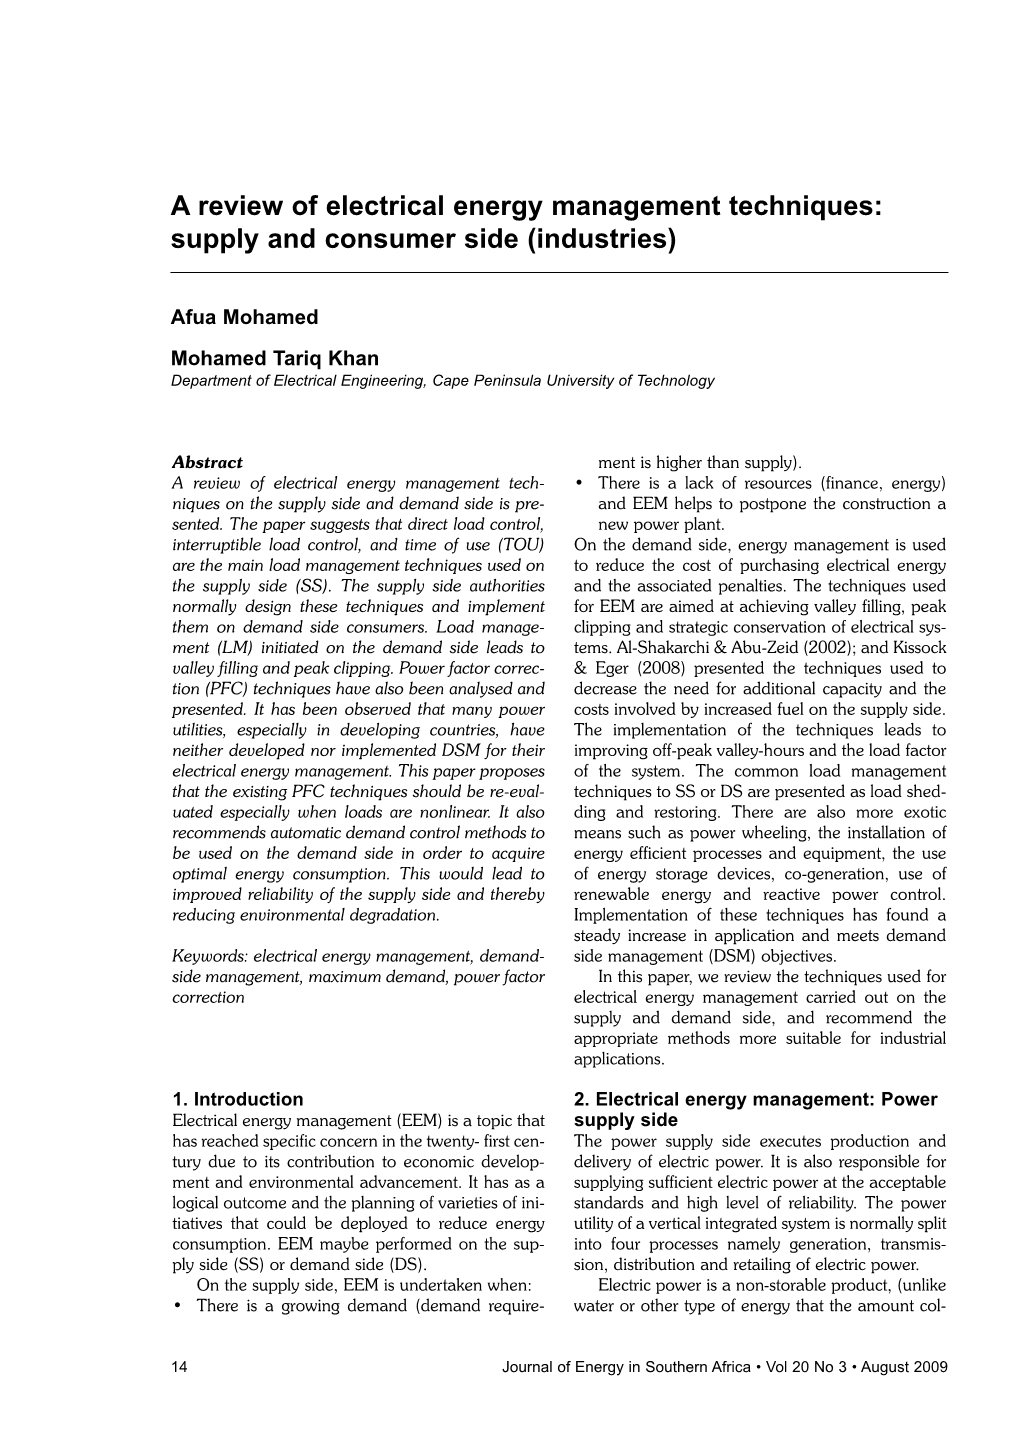 A Review of Electrical Energy Management Techniques: Supply and Consumer Side (Industries)